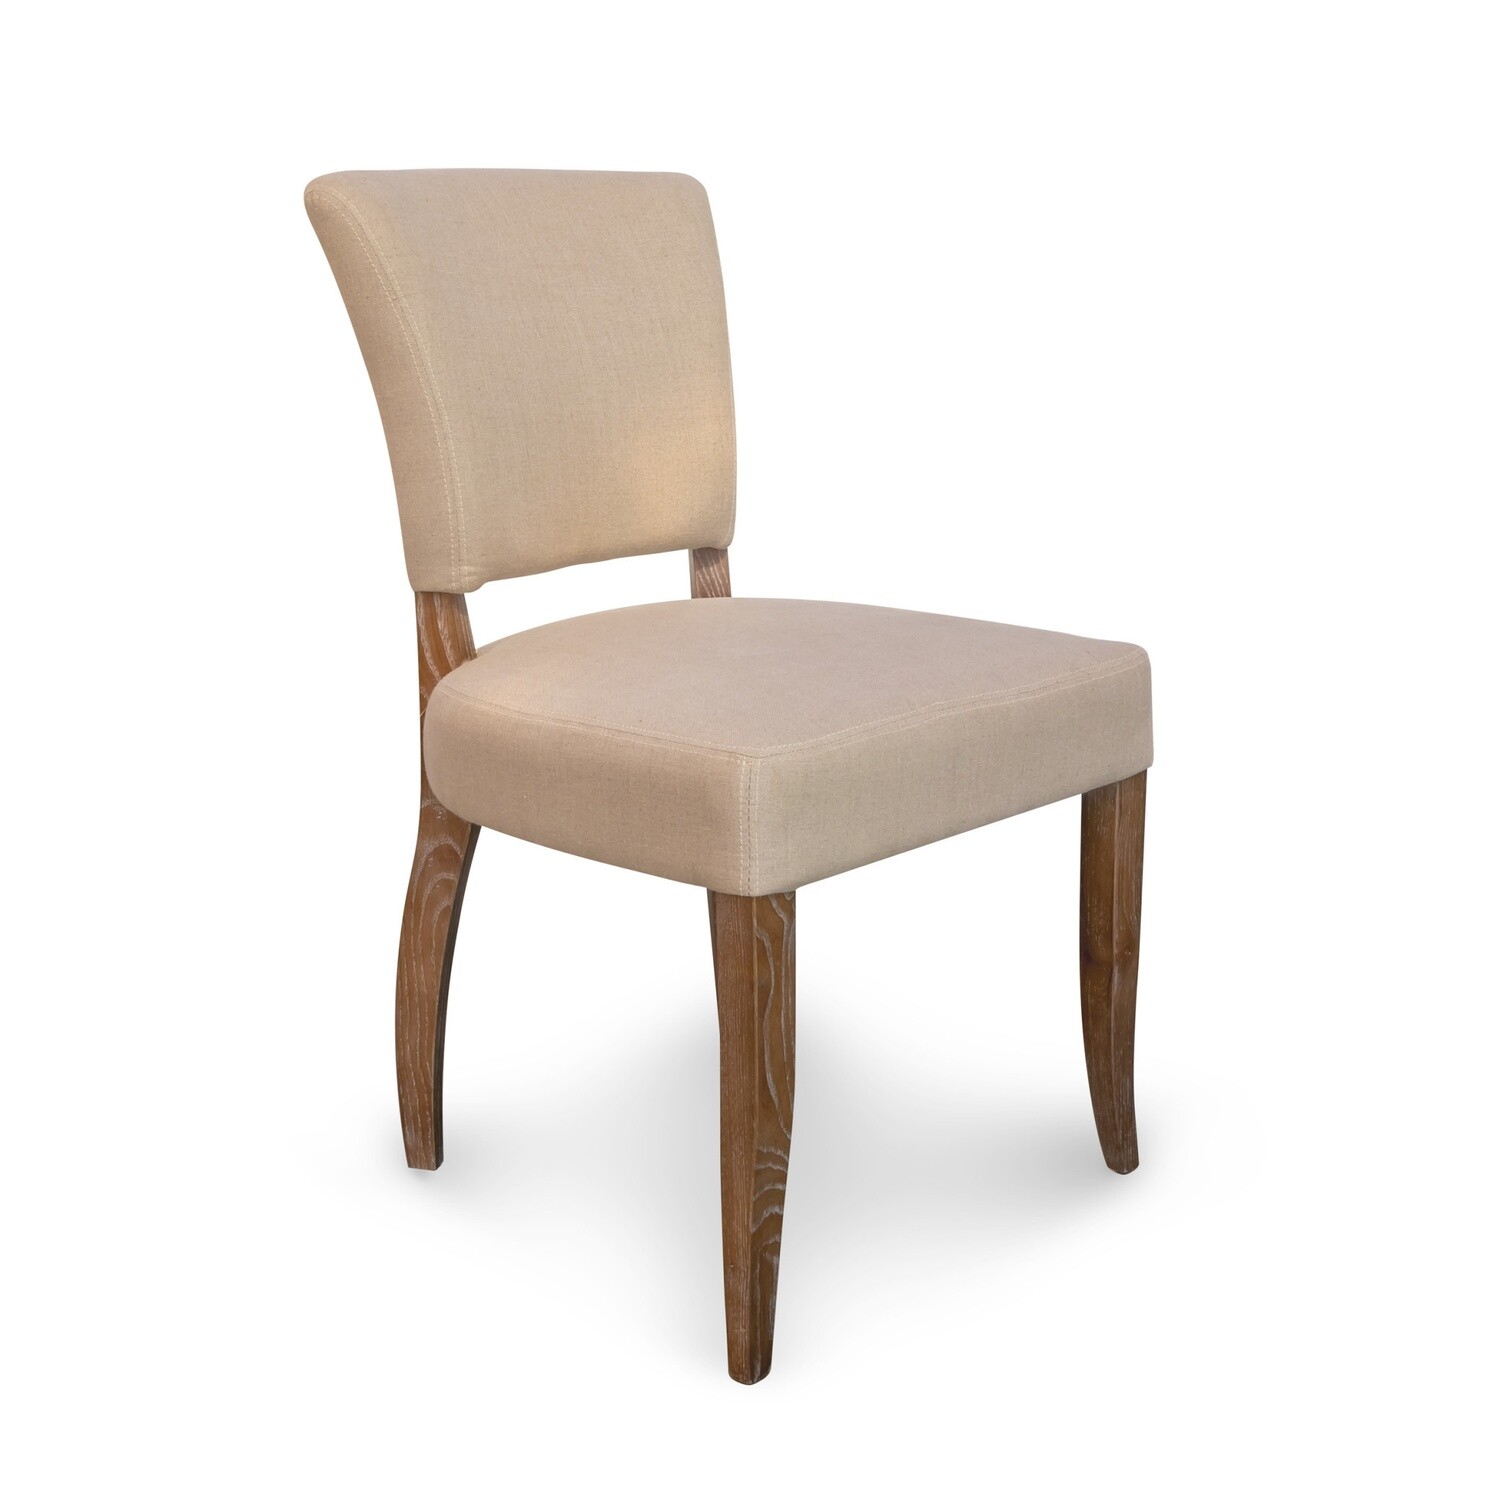 Chair - Classic Dining